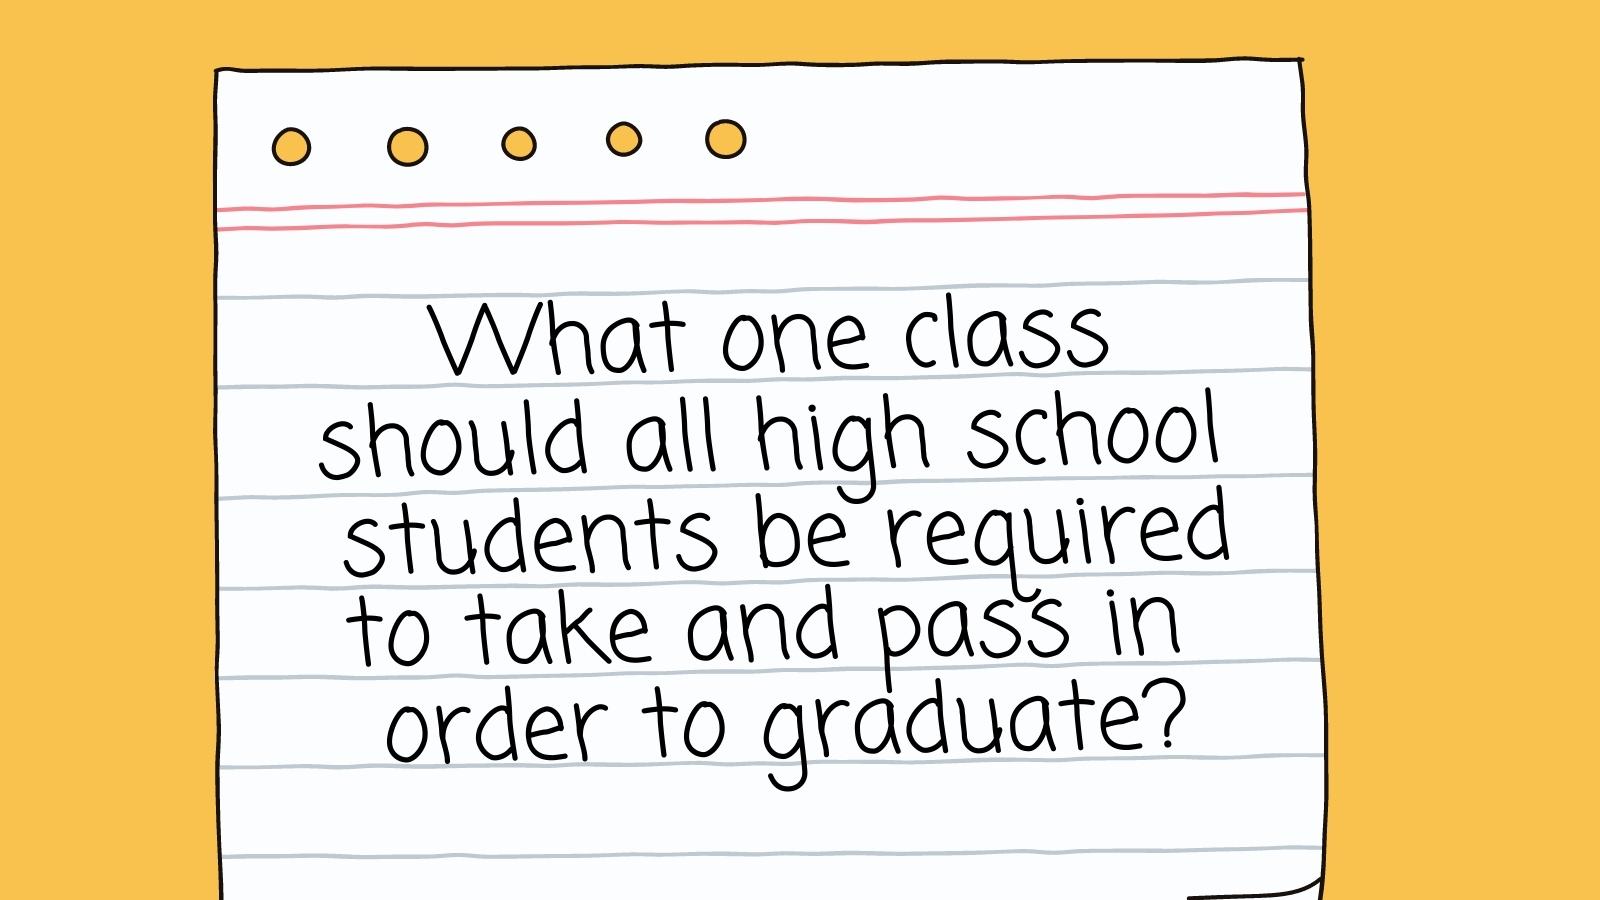 What one class should all high schools students be required to take and pass in order to graduate?